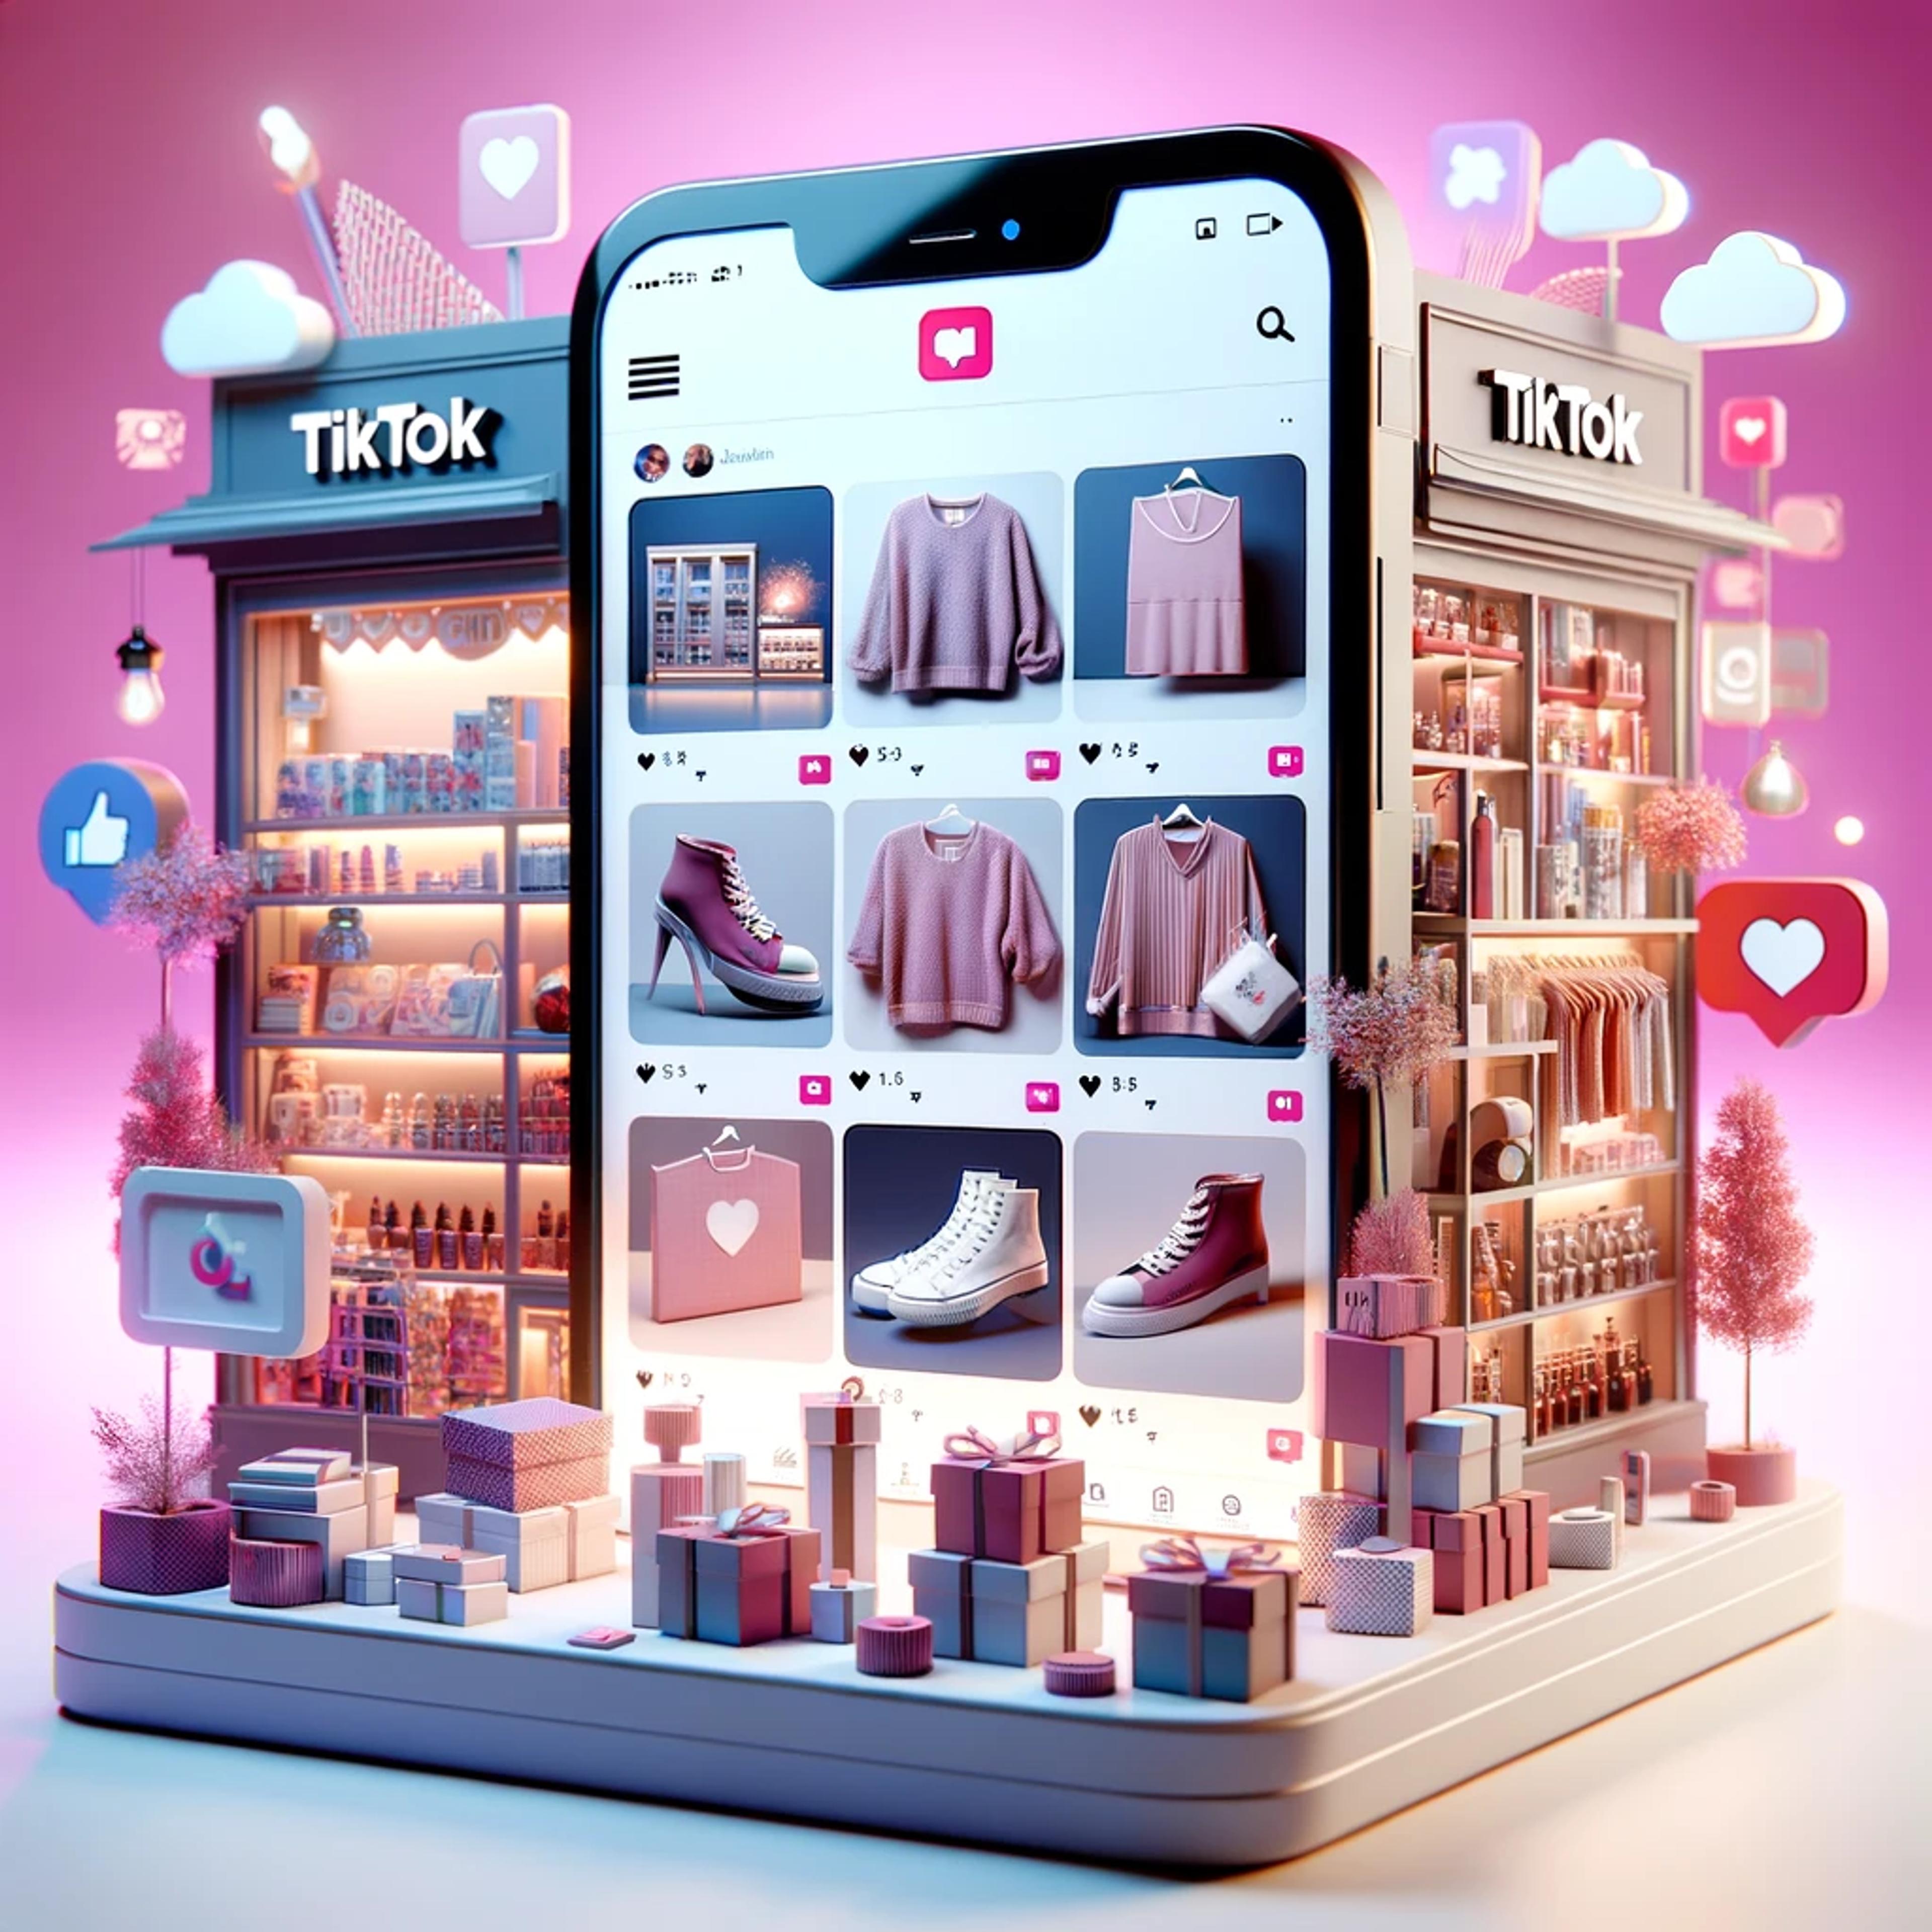 Animation of a TikTok Shop with a smartphone